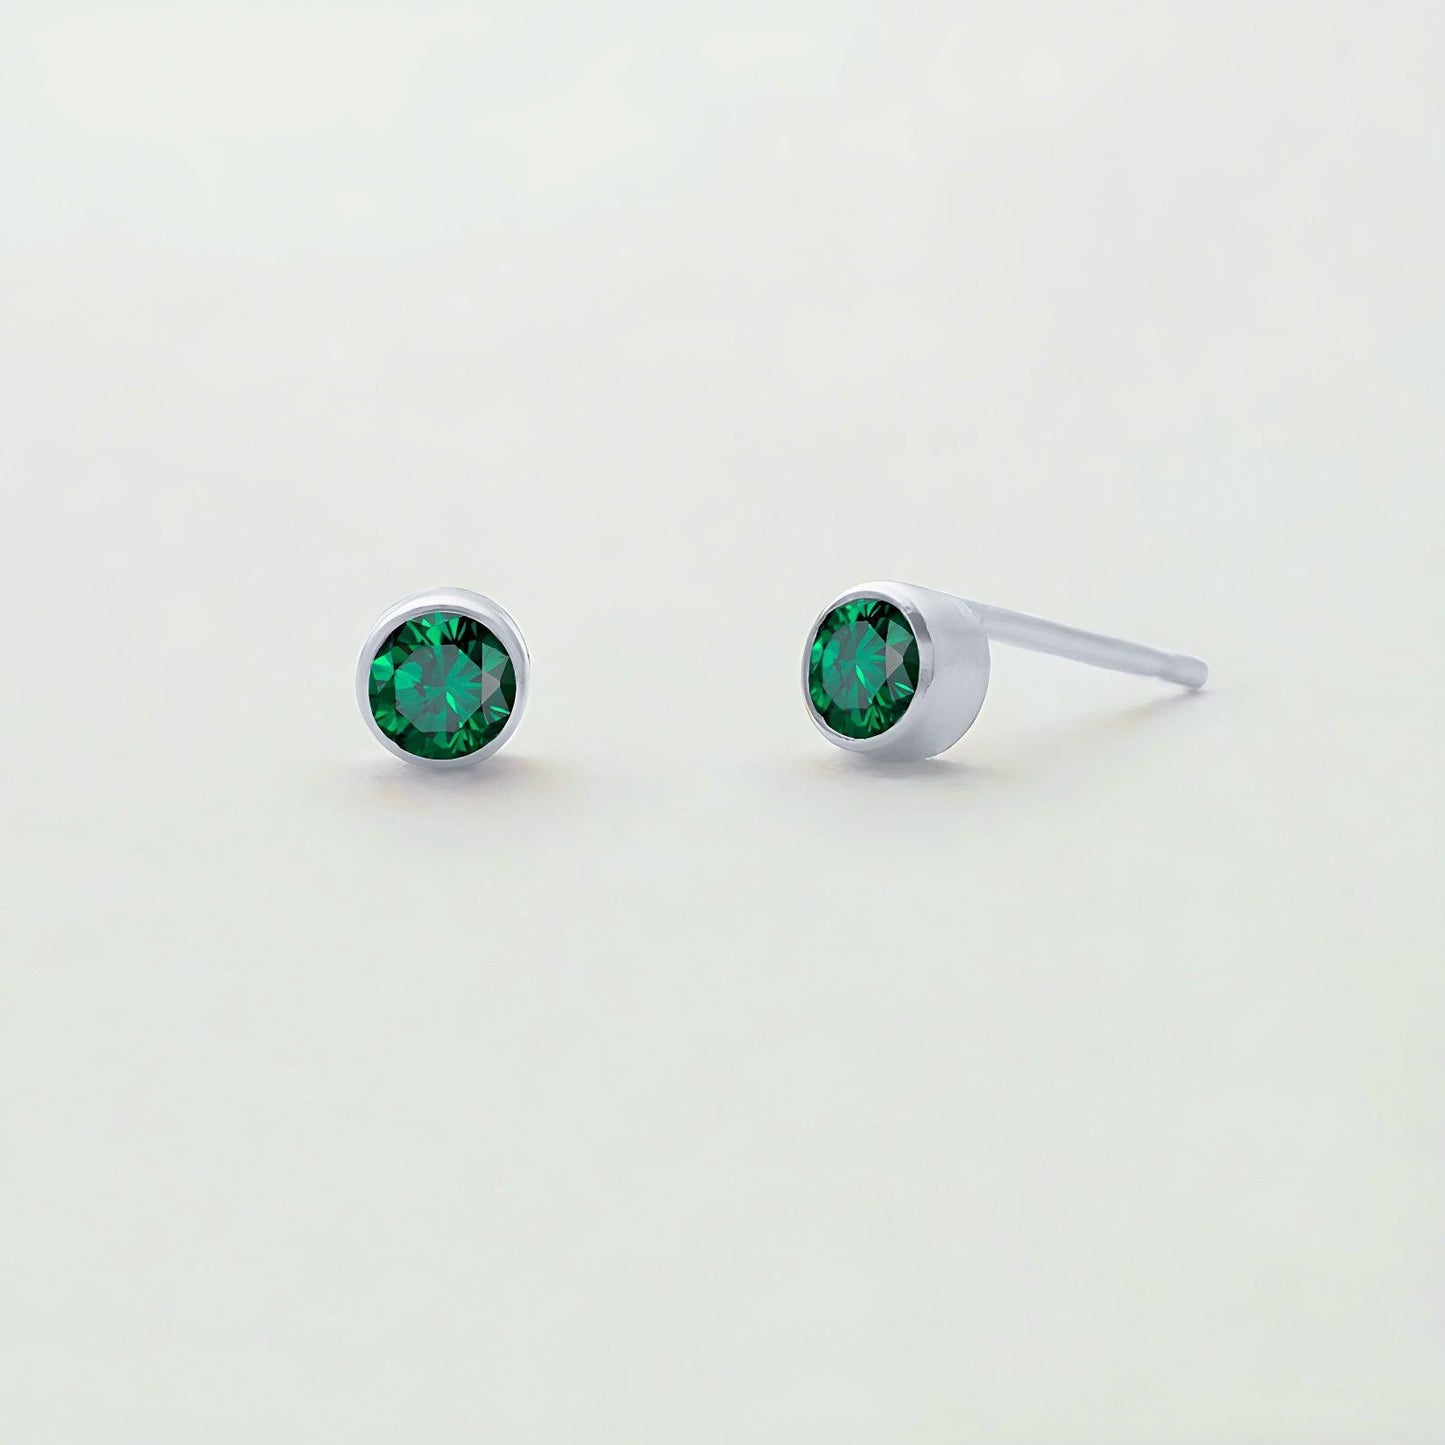 May Birthstone Cute Earrings for Christmas 2023 | May Birthstone Cute Earrings - undefined | birthstone earring, birthstone jewelry, Creative Cute Earrings, May Birthstone Earrings, May birthstone is Emerald | From Hunny Life | hunnylife.com